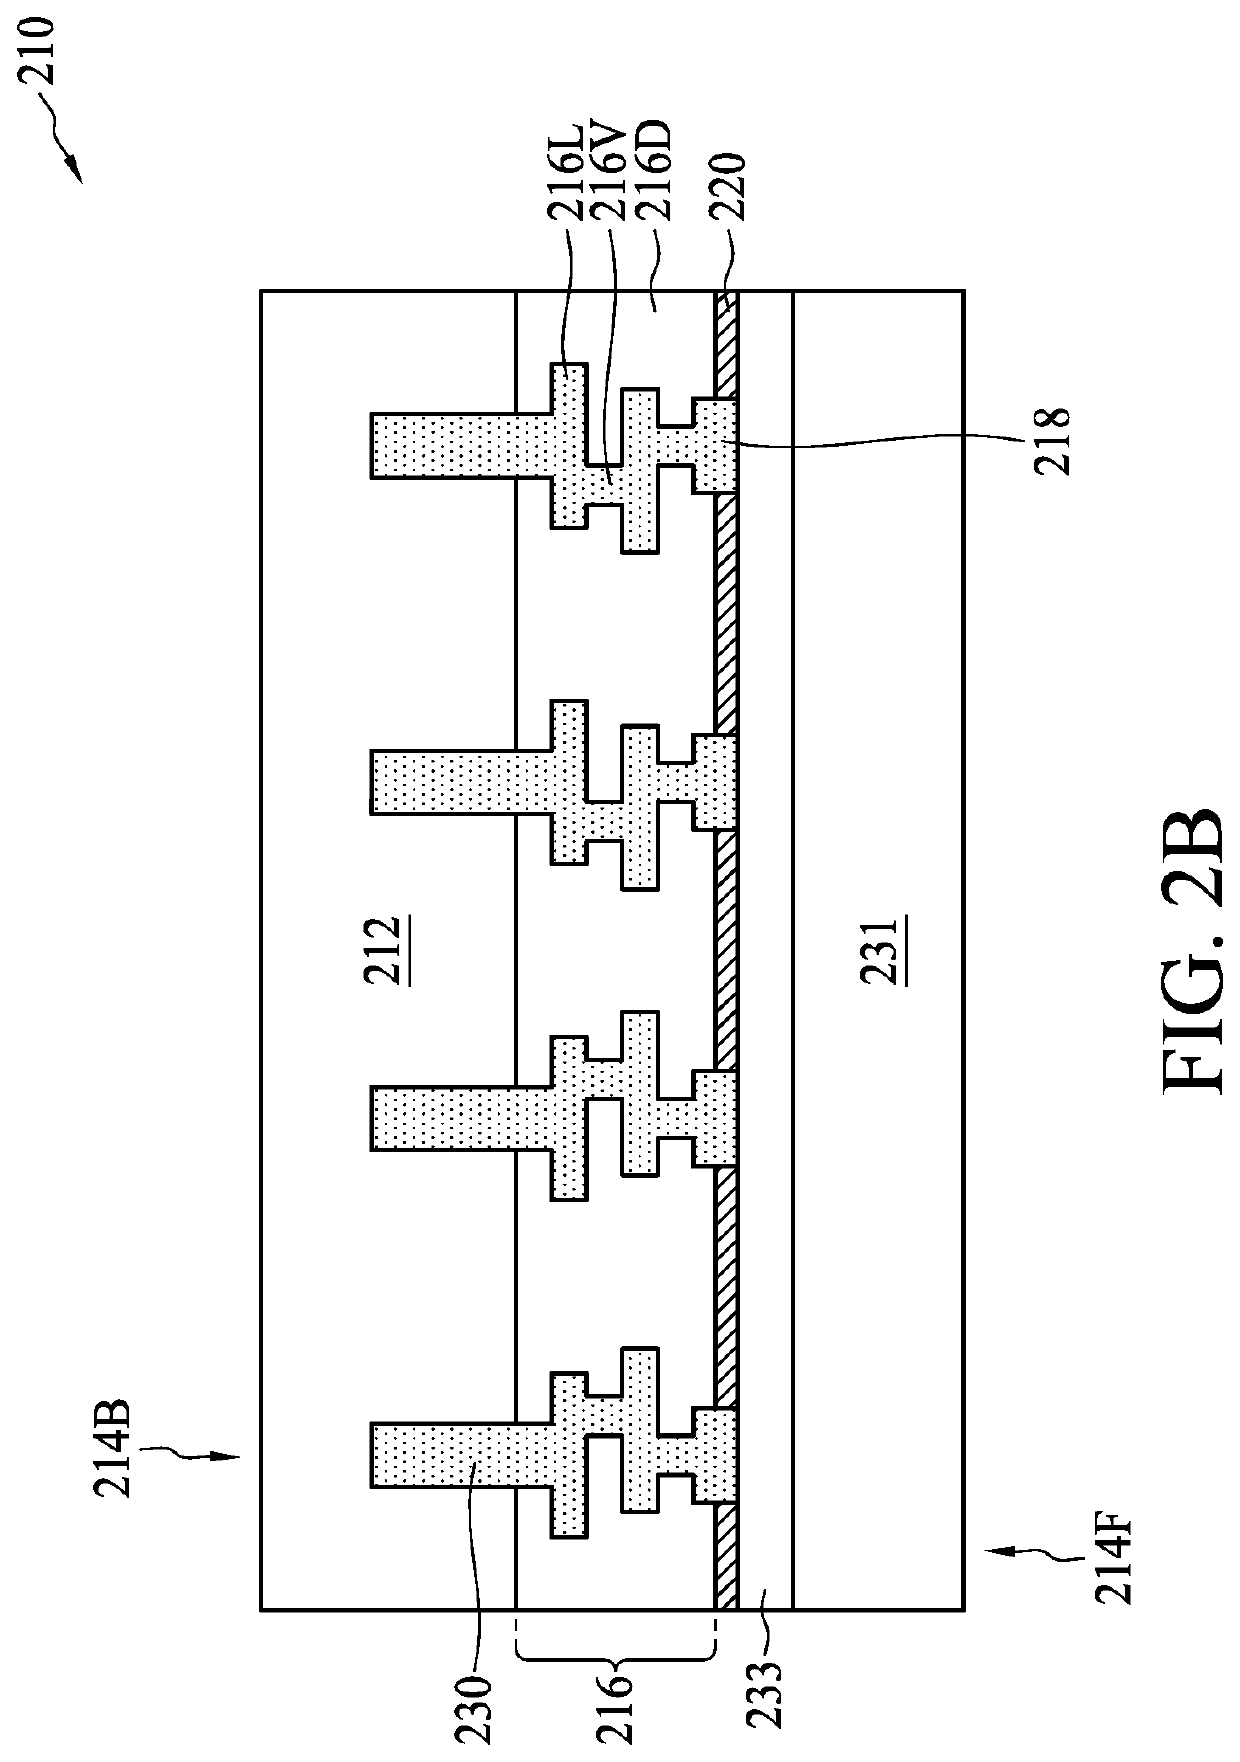 Semiconductor package including hybrid bonding structure and method for preparing the same